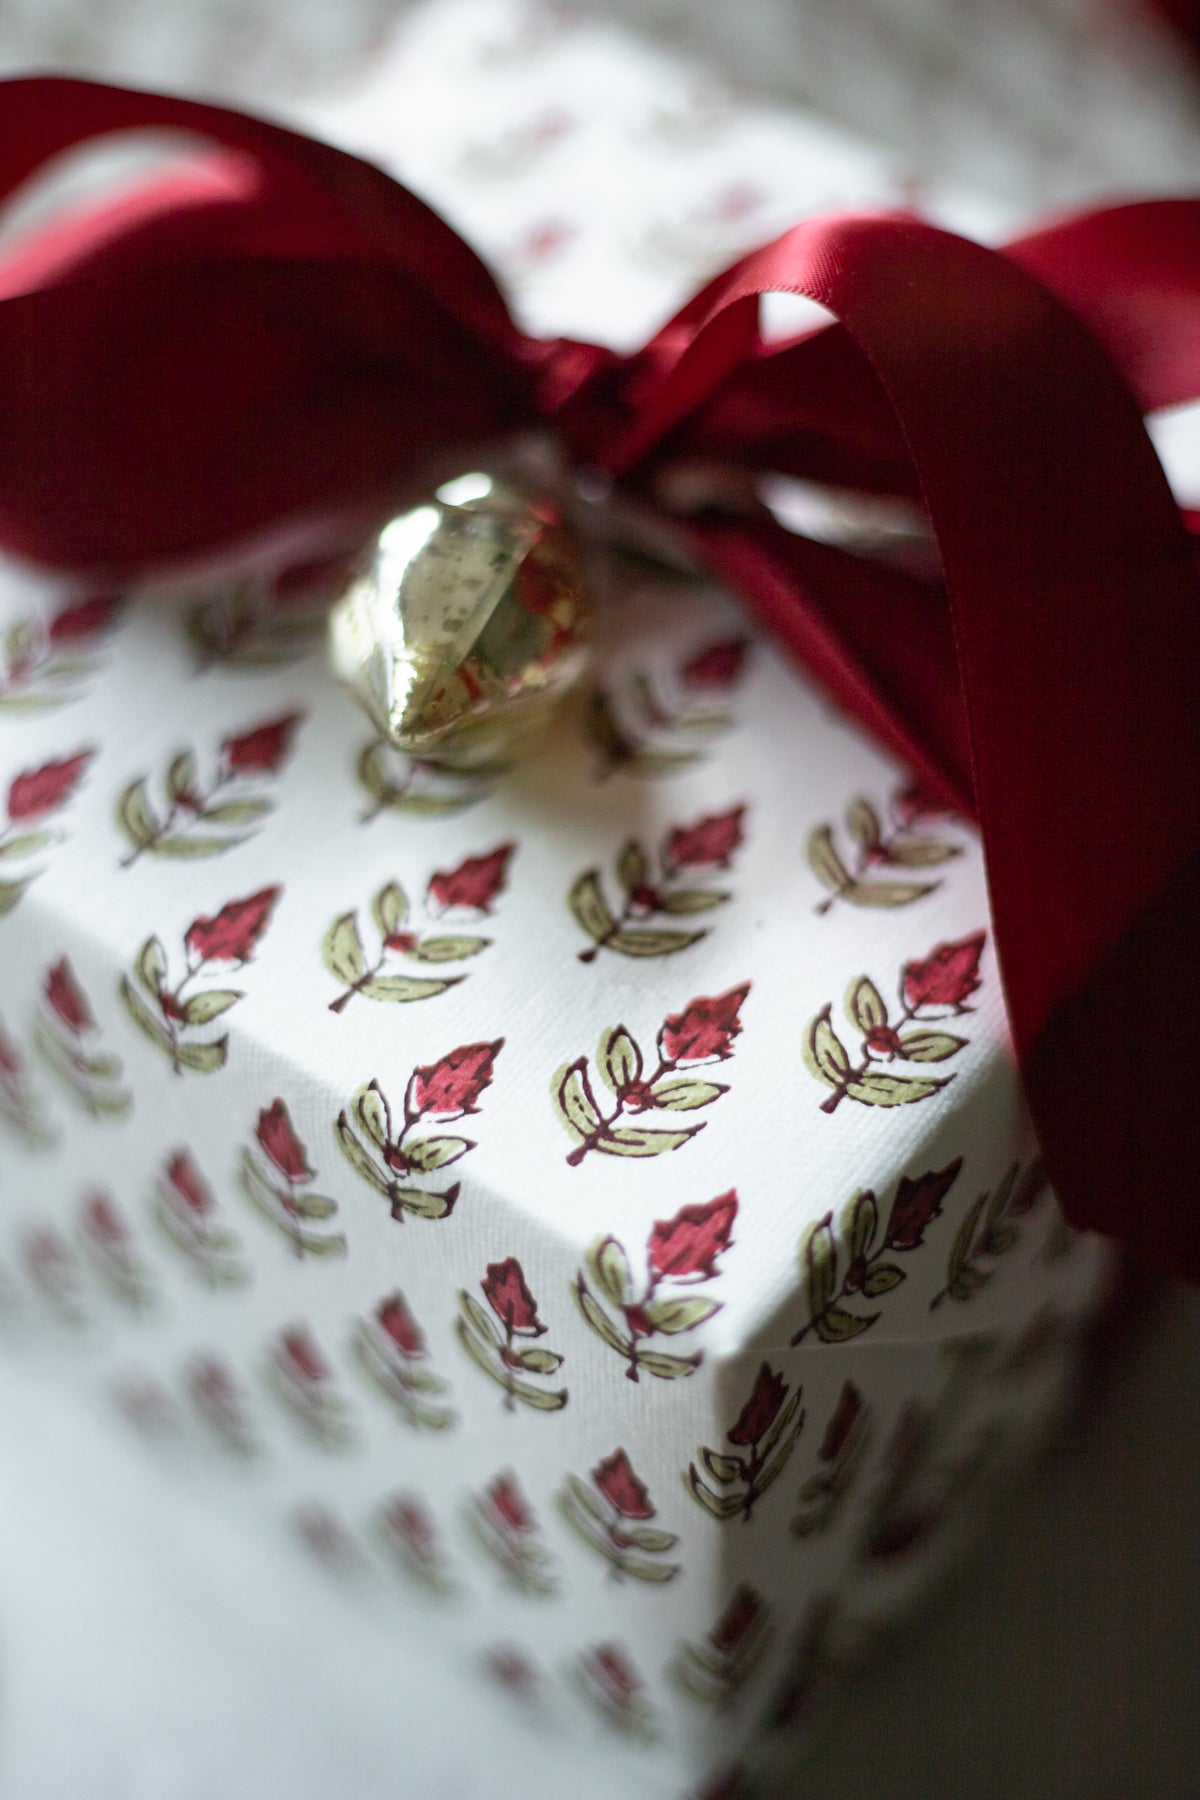 Christmas gift wrap using what you have on hand